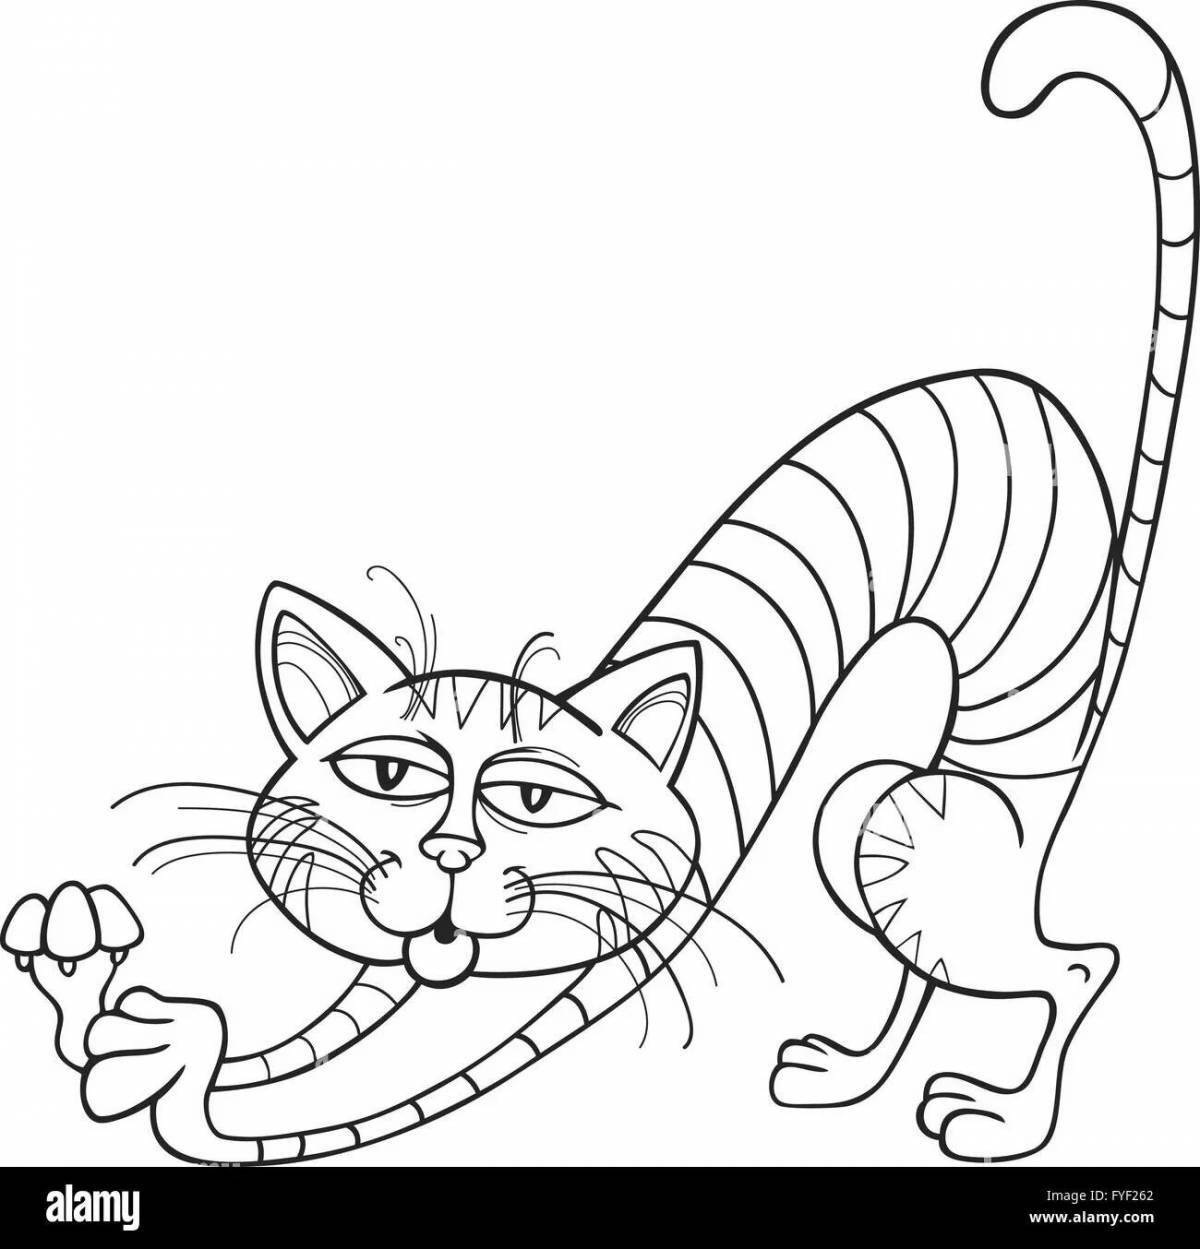 Adorable spiral cat coloring page